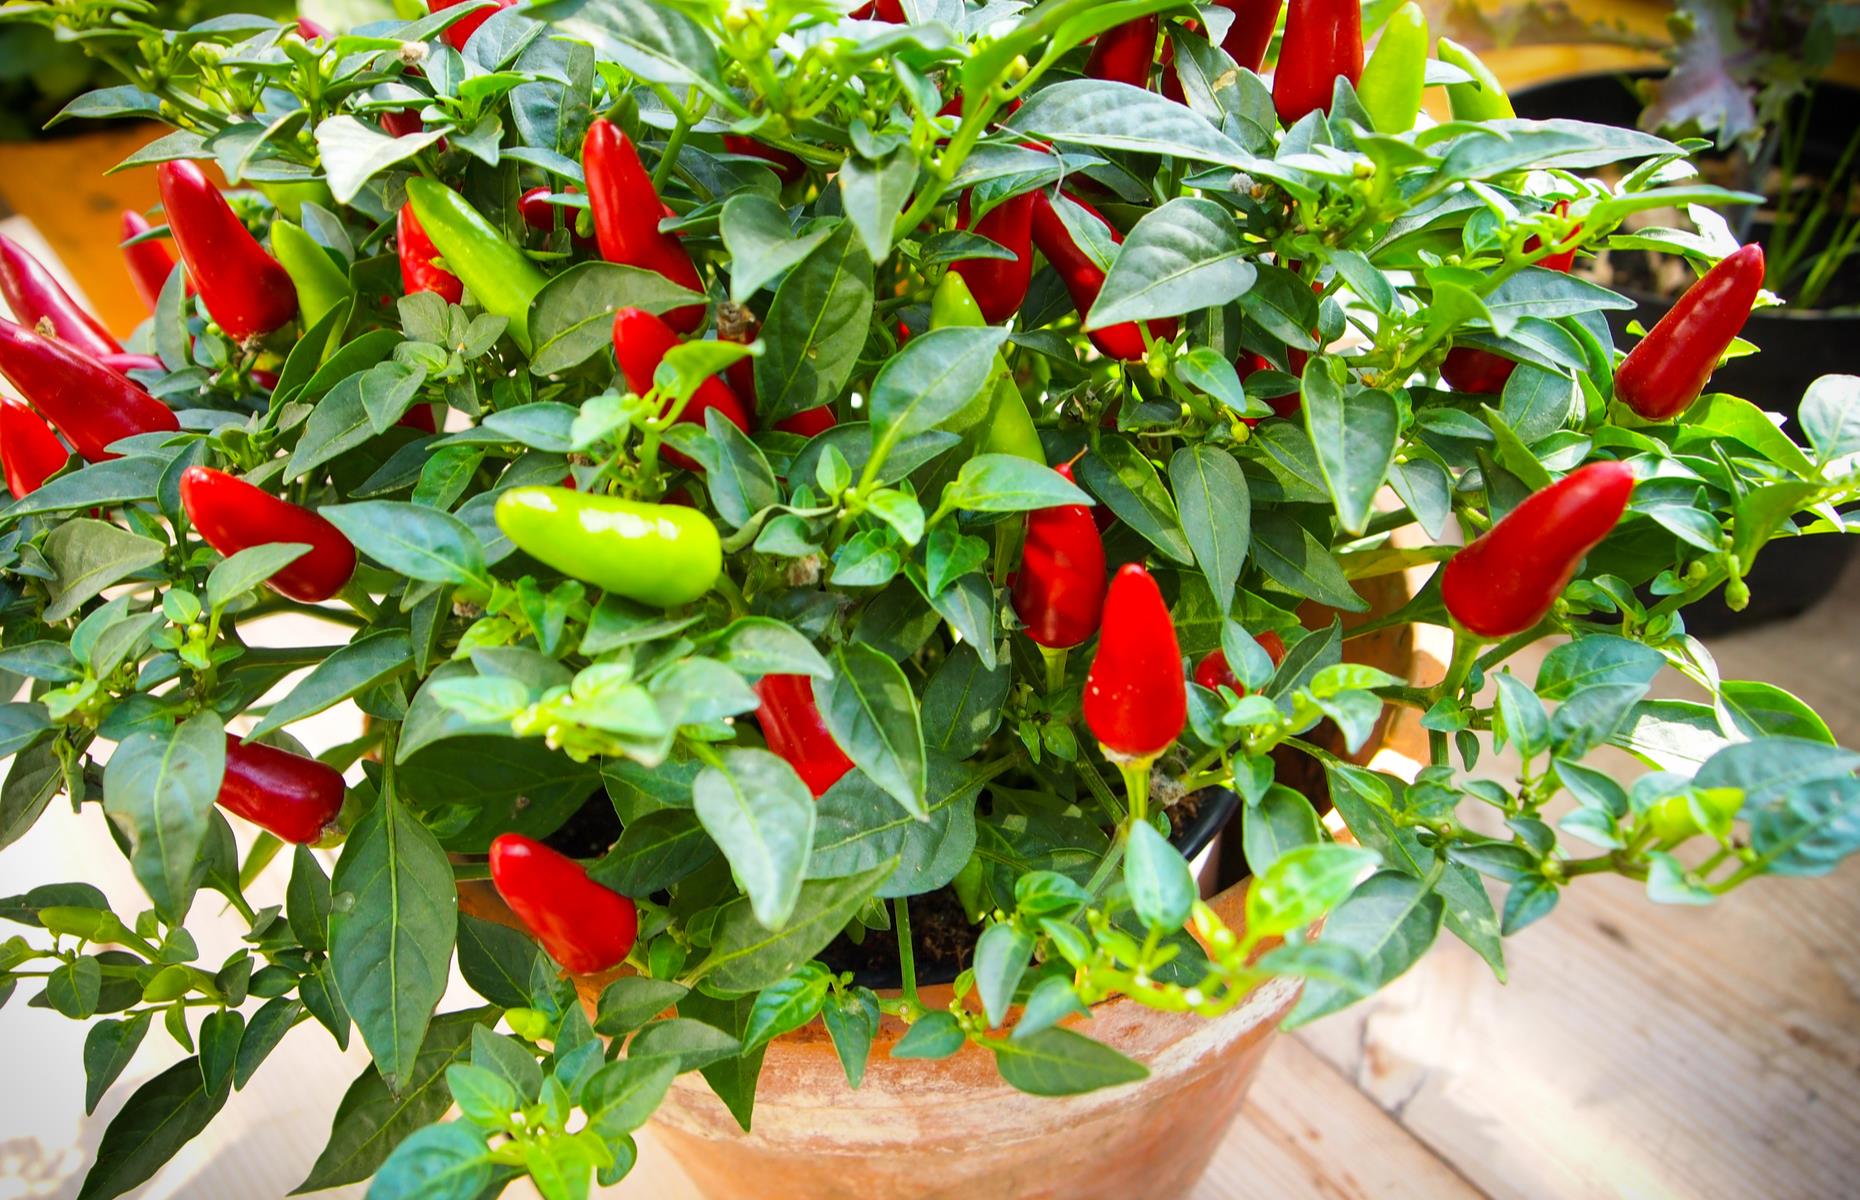 <p>Chilies are remarkably easy to grow if you have a hot, sunny spot in the garden or on your windowsill. Most chili plants are heavy croppers, so you don't need many, and they don't require much TLC. They just need plenty of sun and the occasional water.</p>  <p><strong><a href="https://www.lovefood.com/recipes/57263/grow-and-cook-chilli-jam-recipe">Read our guide to growing chilies here</a></strong></p>